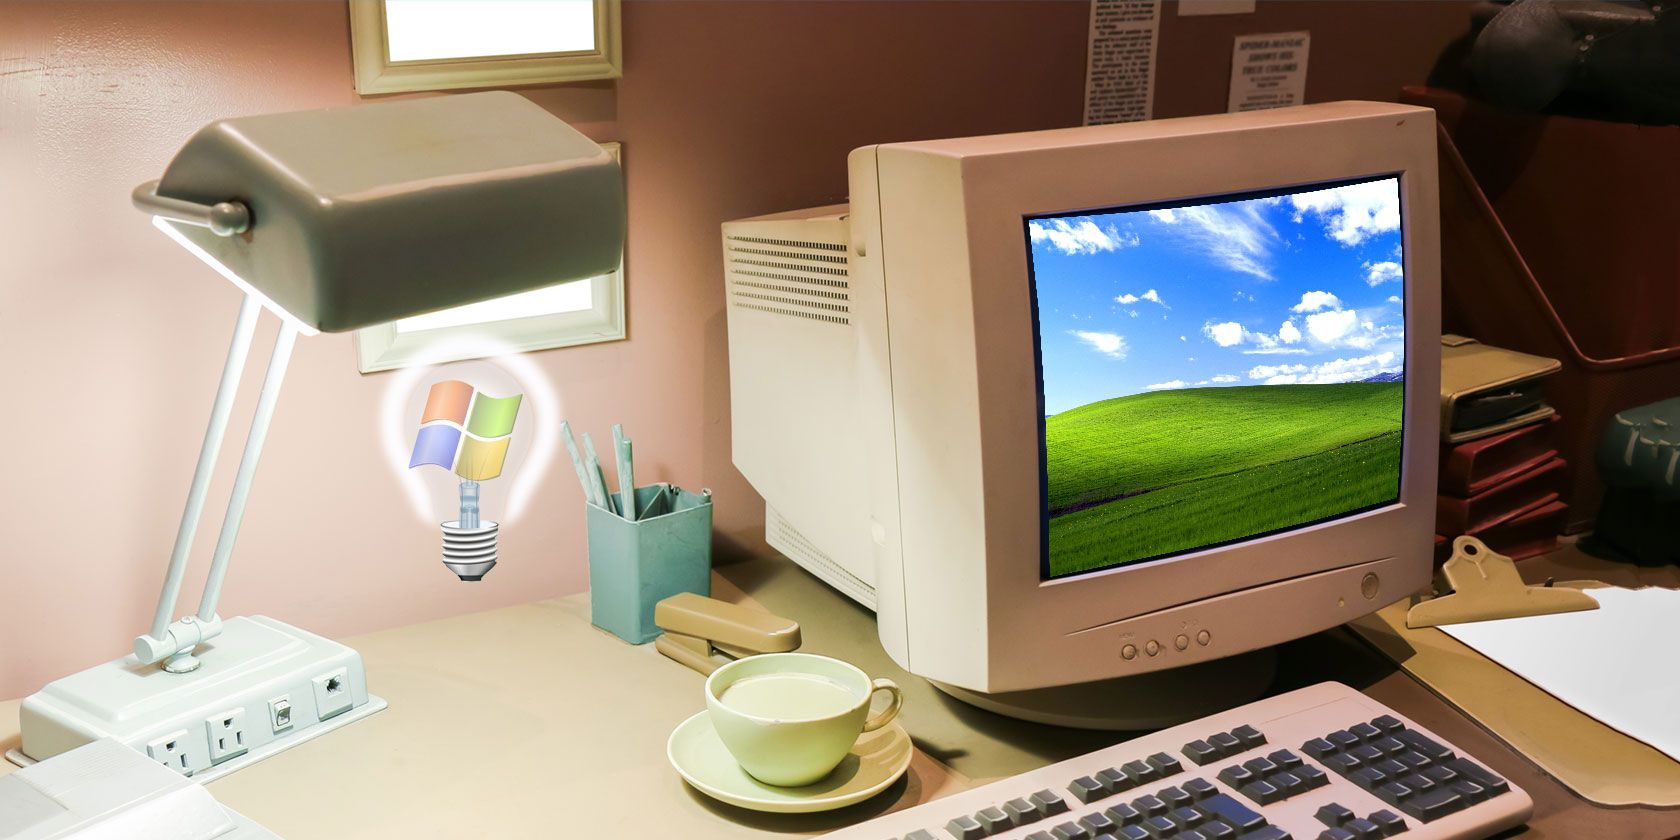 How to Best Use Your Old Windows XP or Vista Computer | MakeUseOf